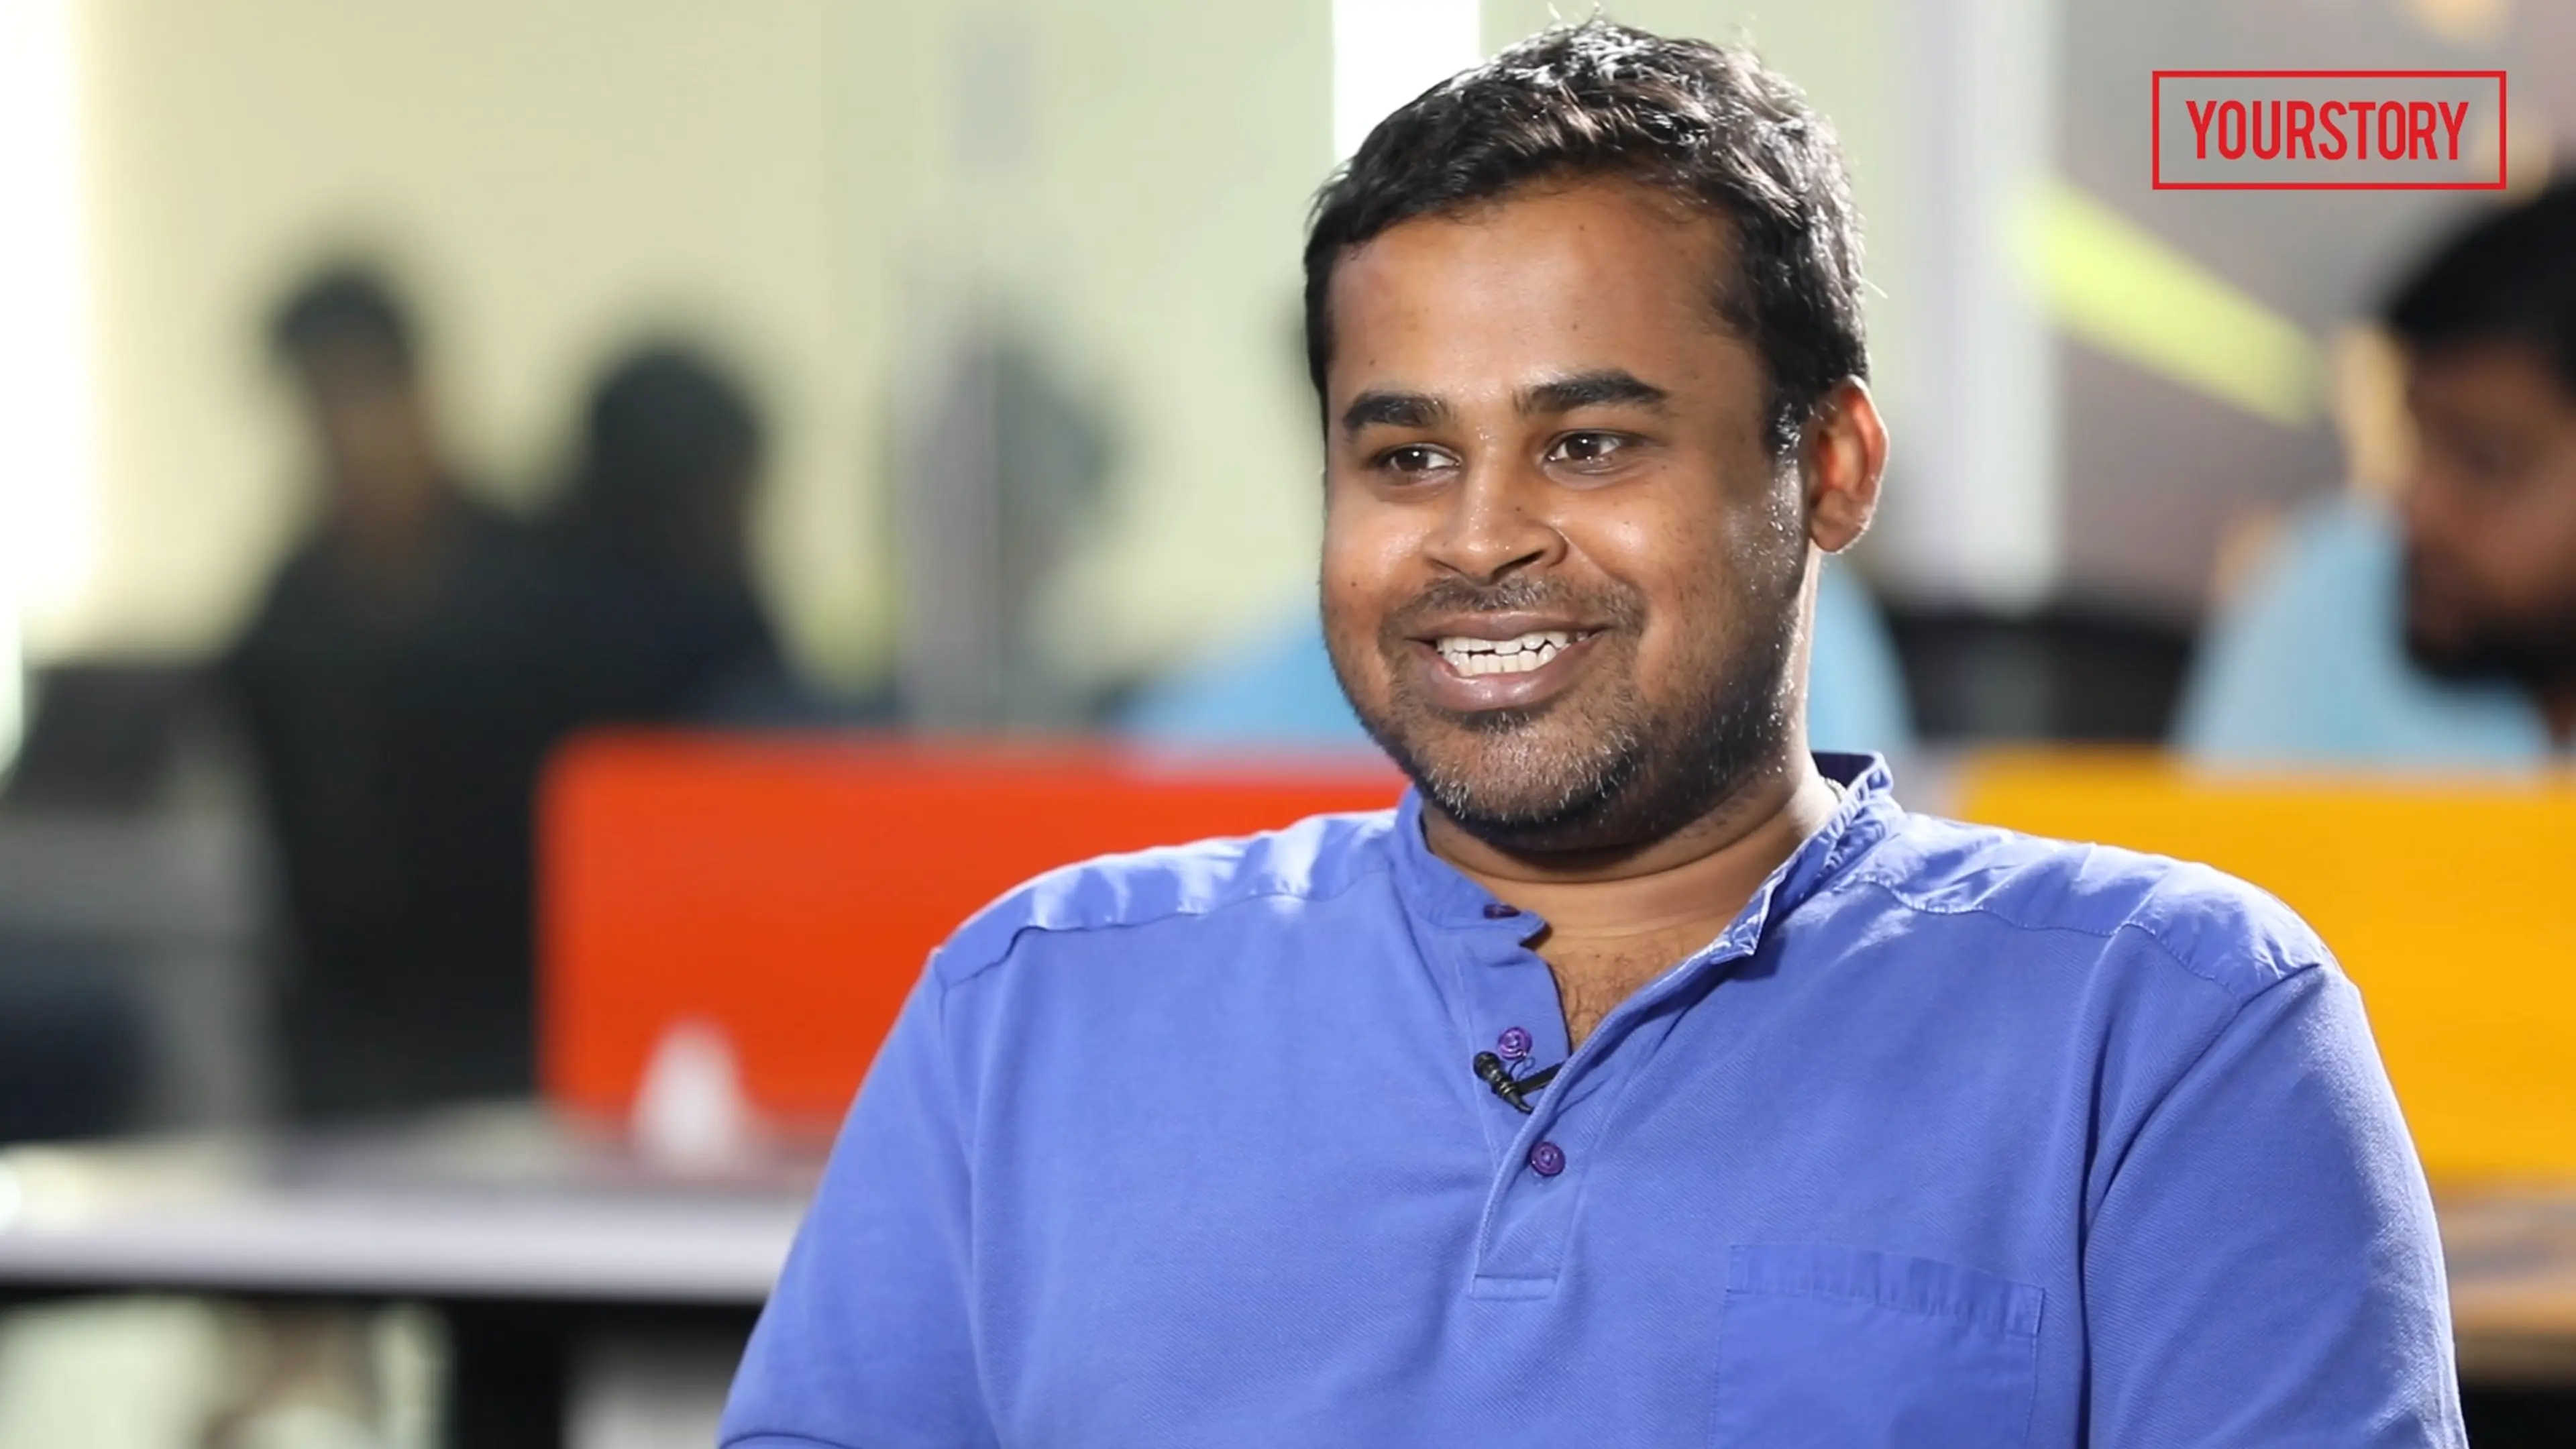 [Watch] Ninjacart Co-founder Thiru chalks out his journey in inventing the wheel for fresh produce ecommerce